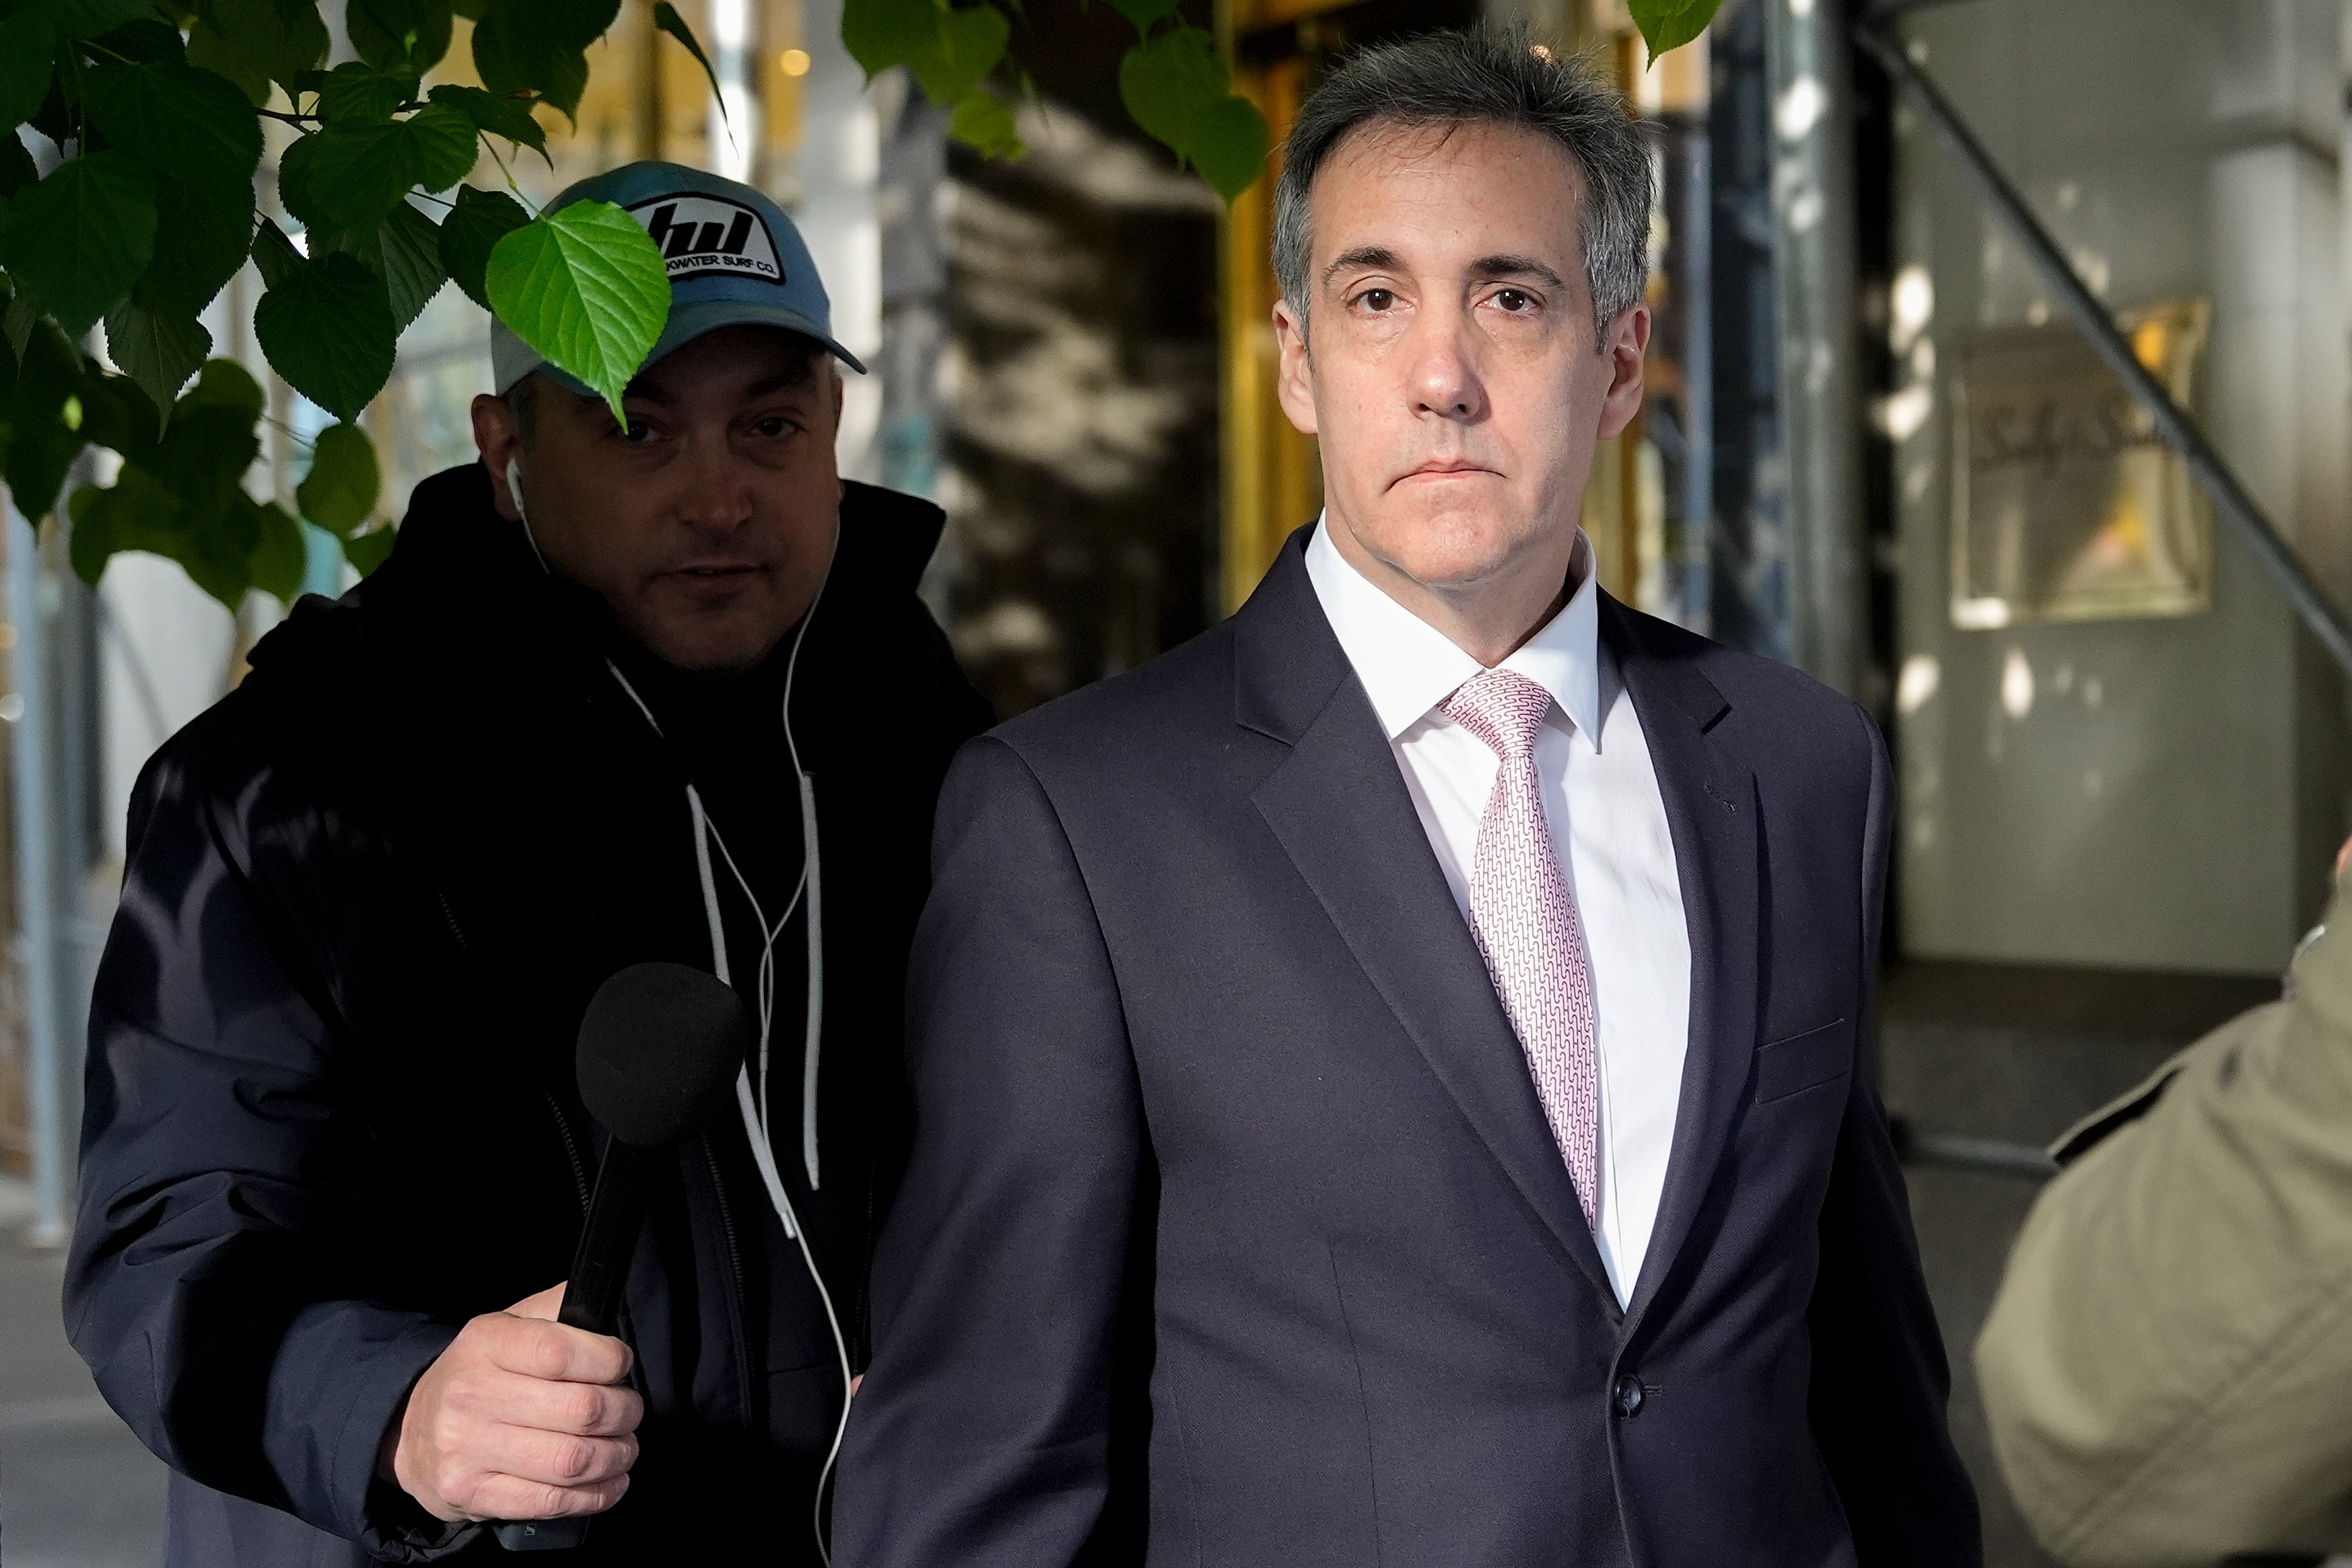 Cohen leaves his apartment building on his way to Manhattan criminal court on Monday